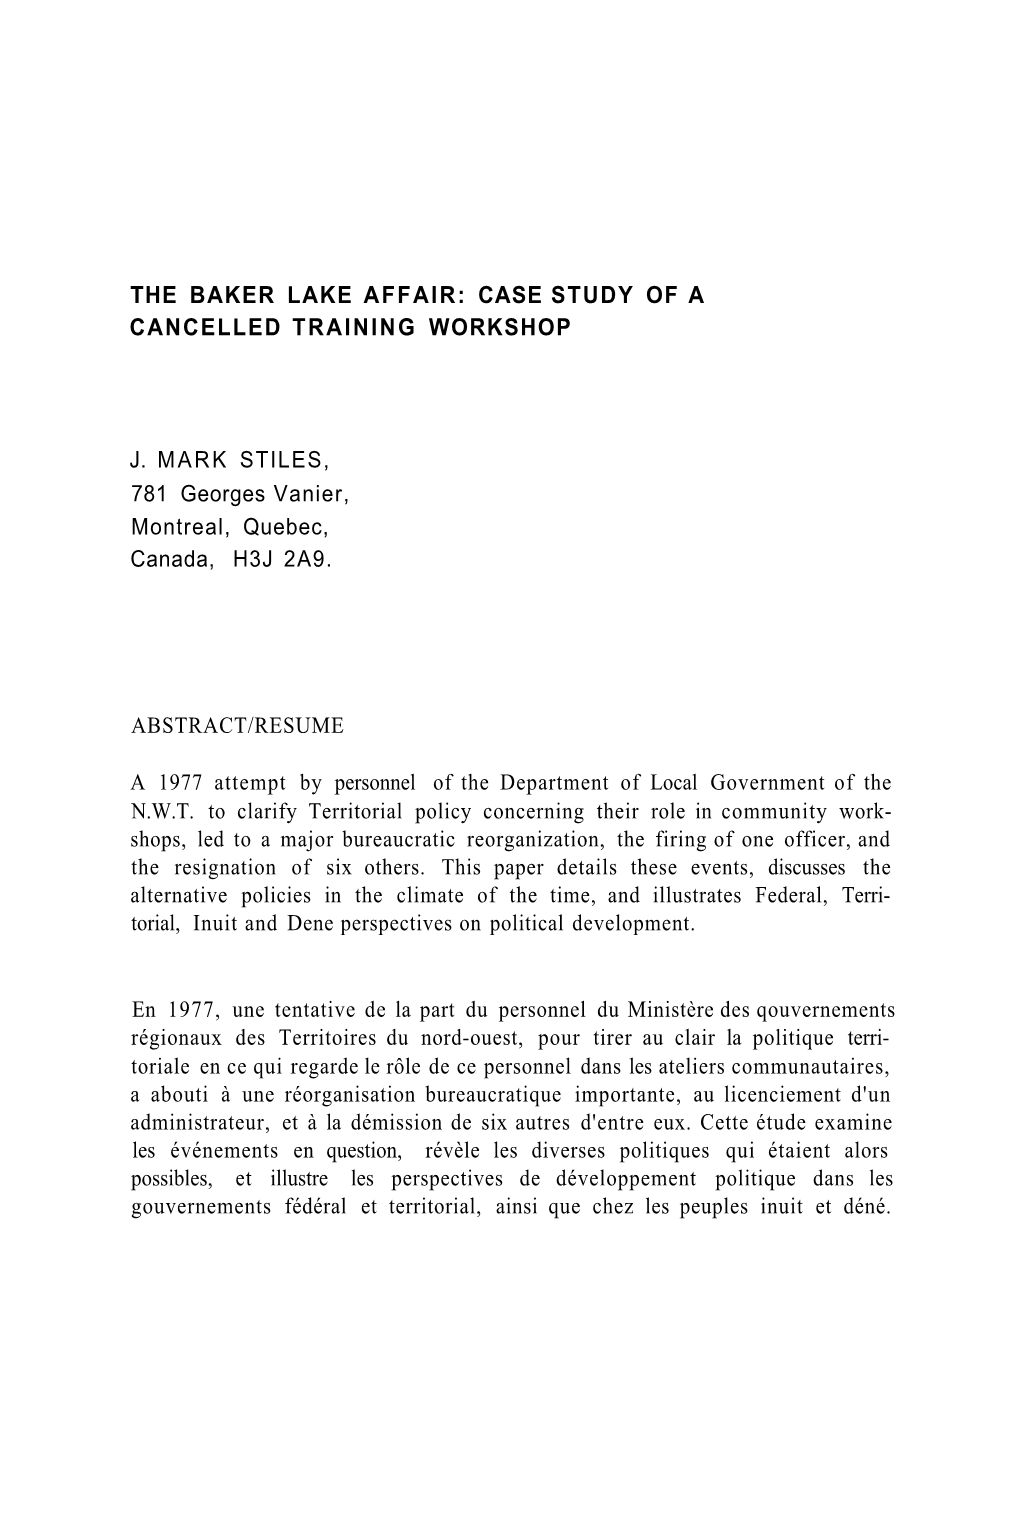 The Baker Affair: Case Study of a Cancelled Training Workshop